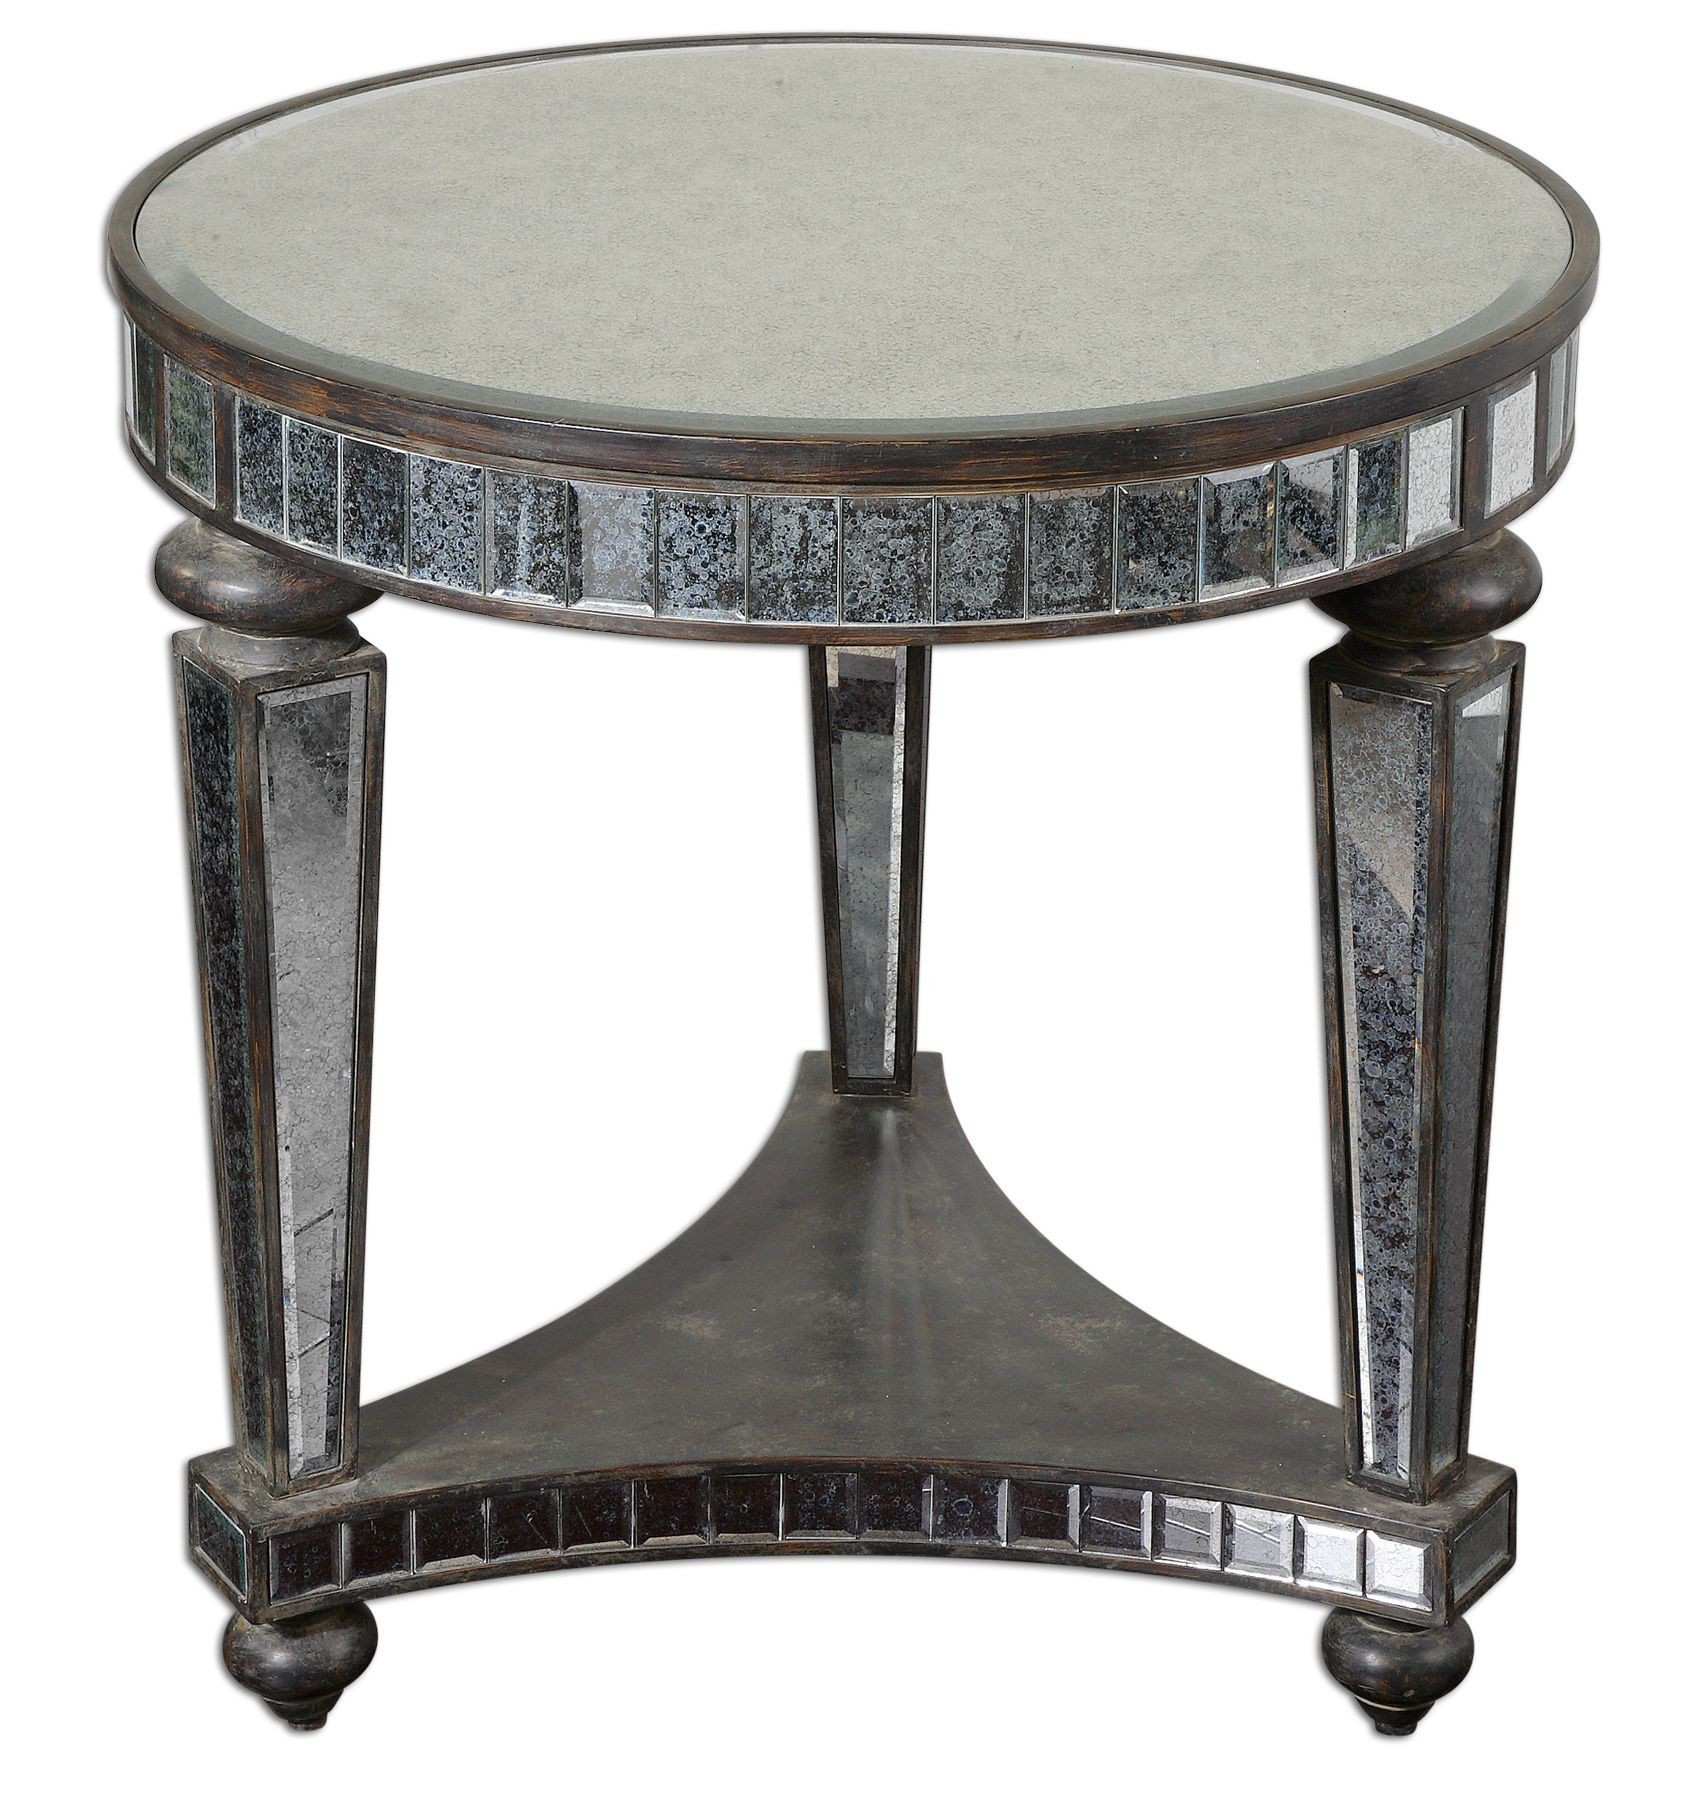 lovely round mirrored end table for coffee best old and vintage accent with shelves black bedside baroque chair ott trestle bench legs west elm globe lamp hampton bay patio dining